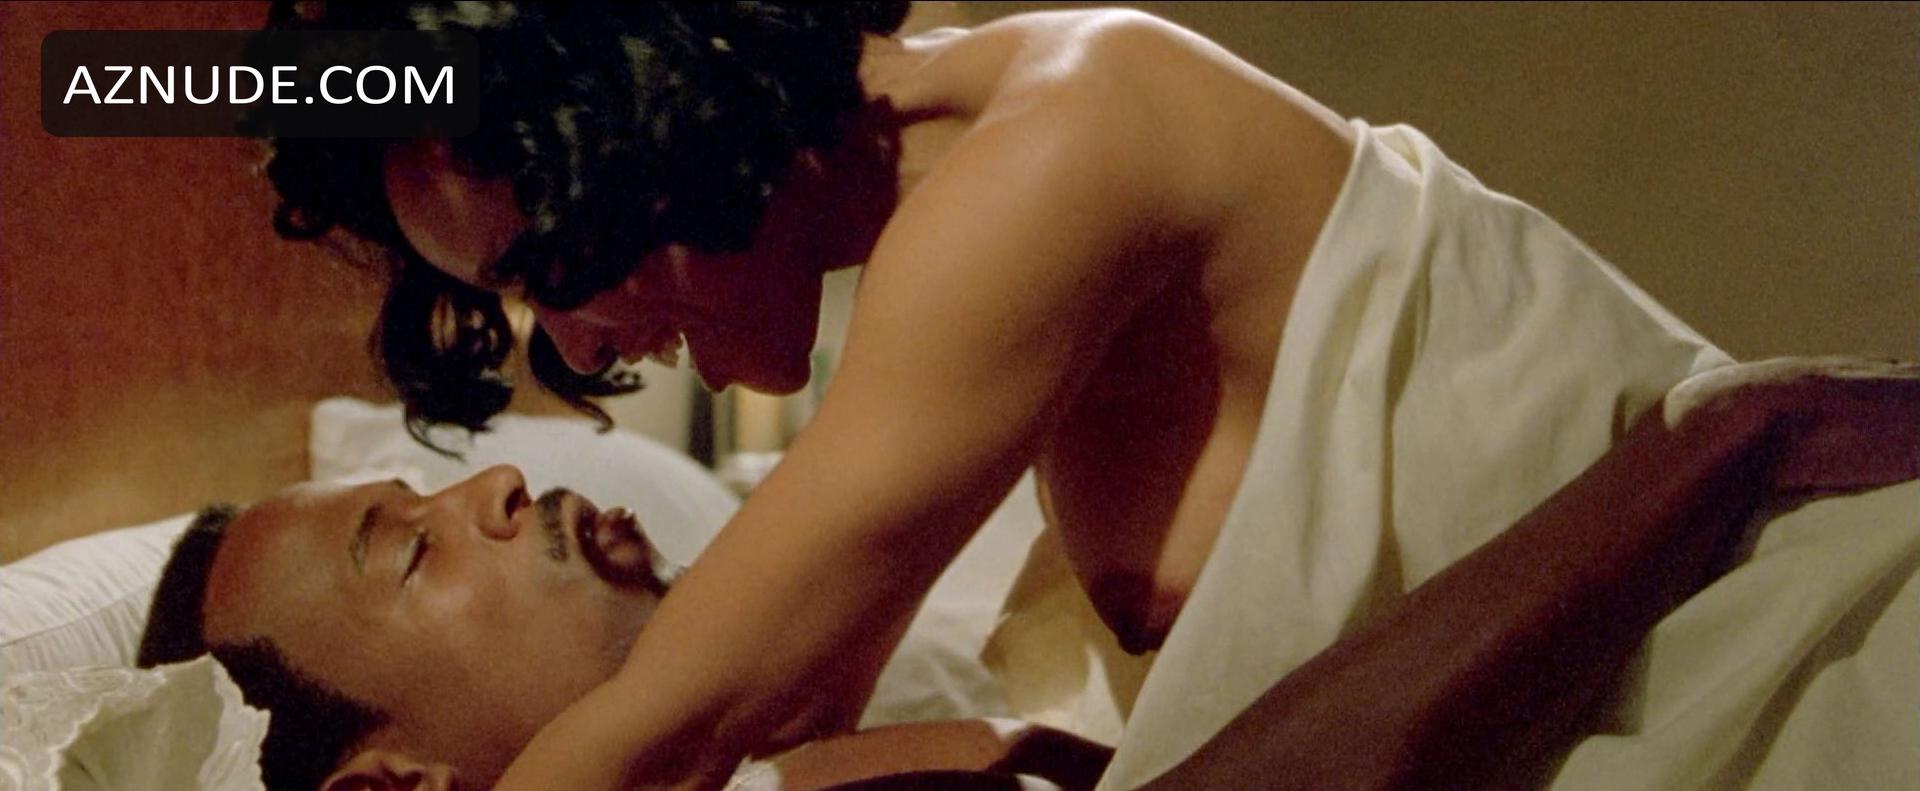 dean flores recommends lynn whitfield naked pic